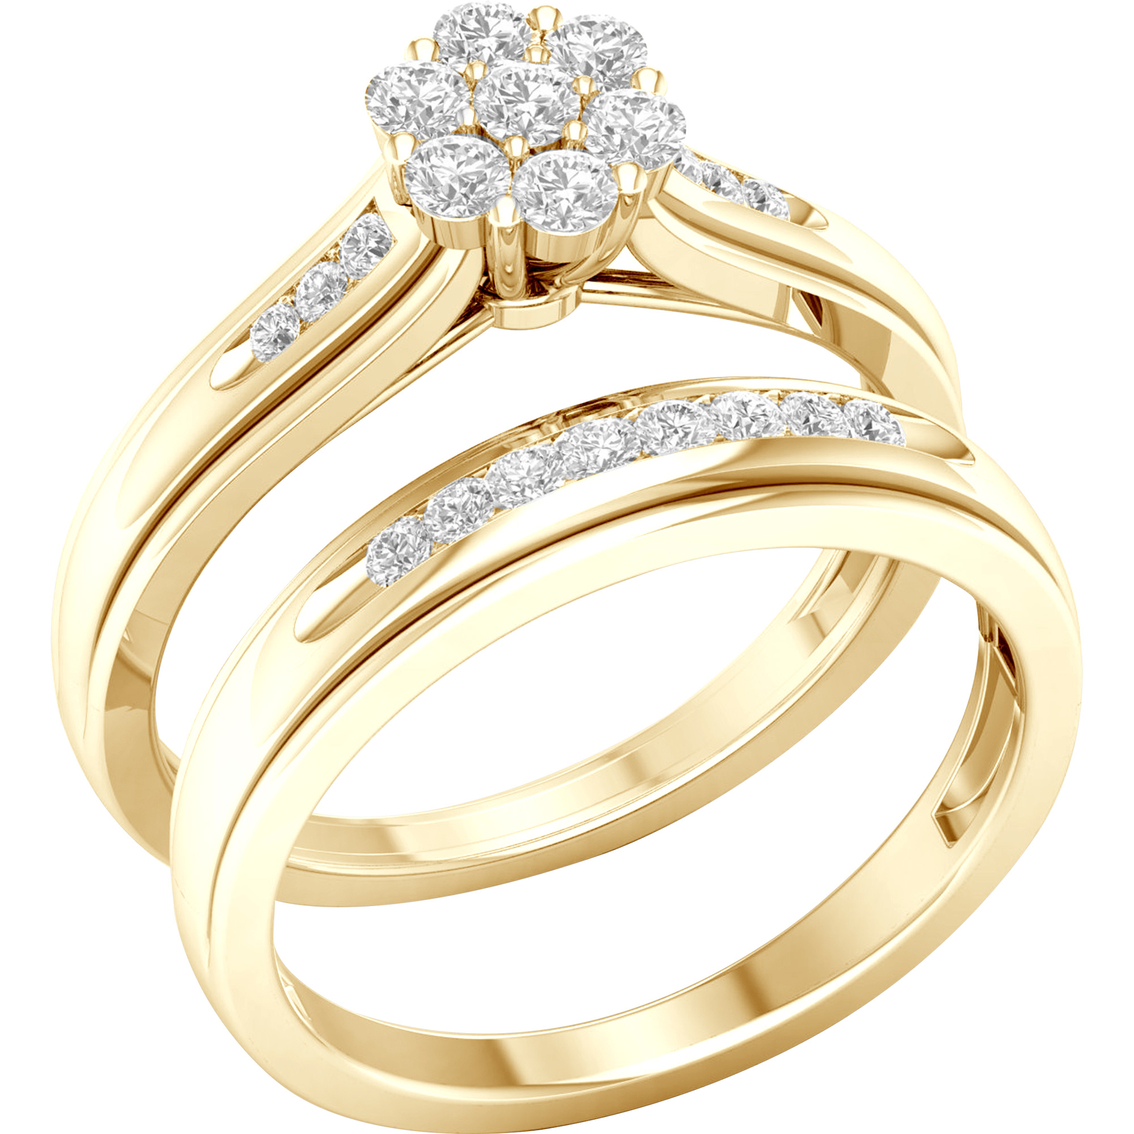 14K Yellow Gold Over Sterling Silver 3/8 CTW Diamond Bridal Set - Image 2 of 4